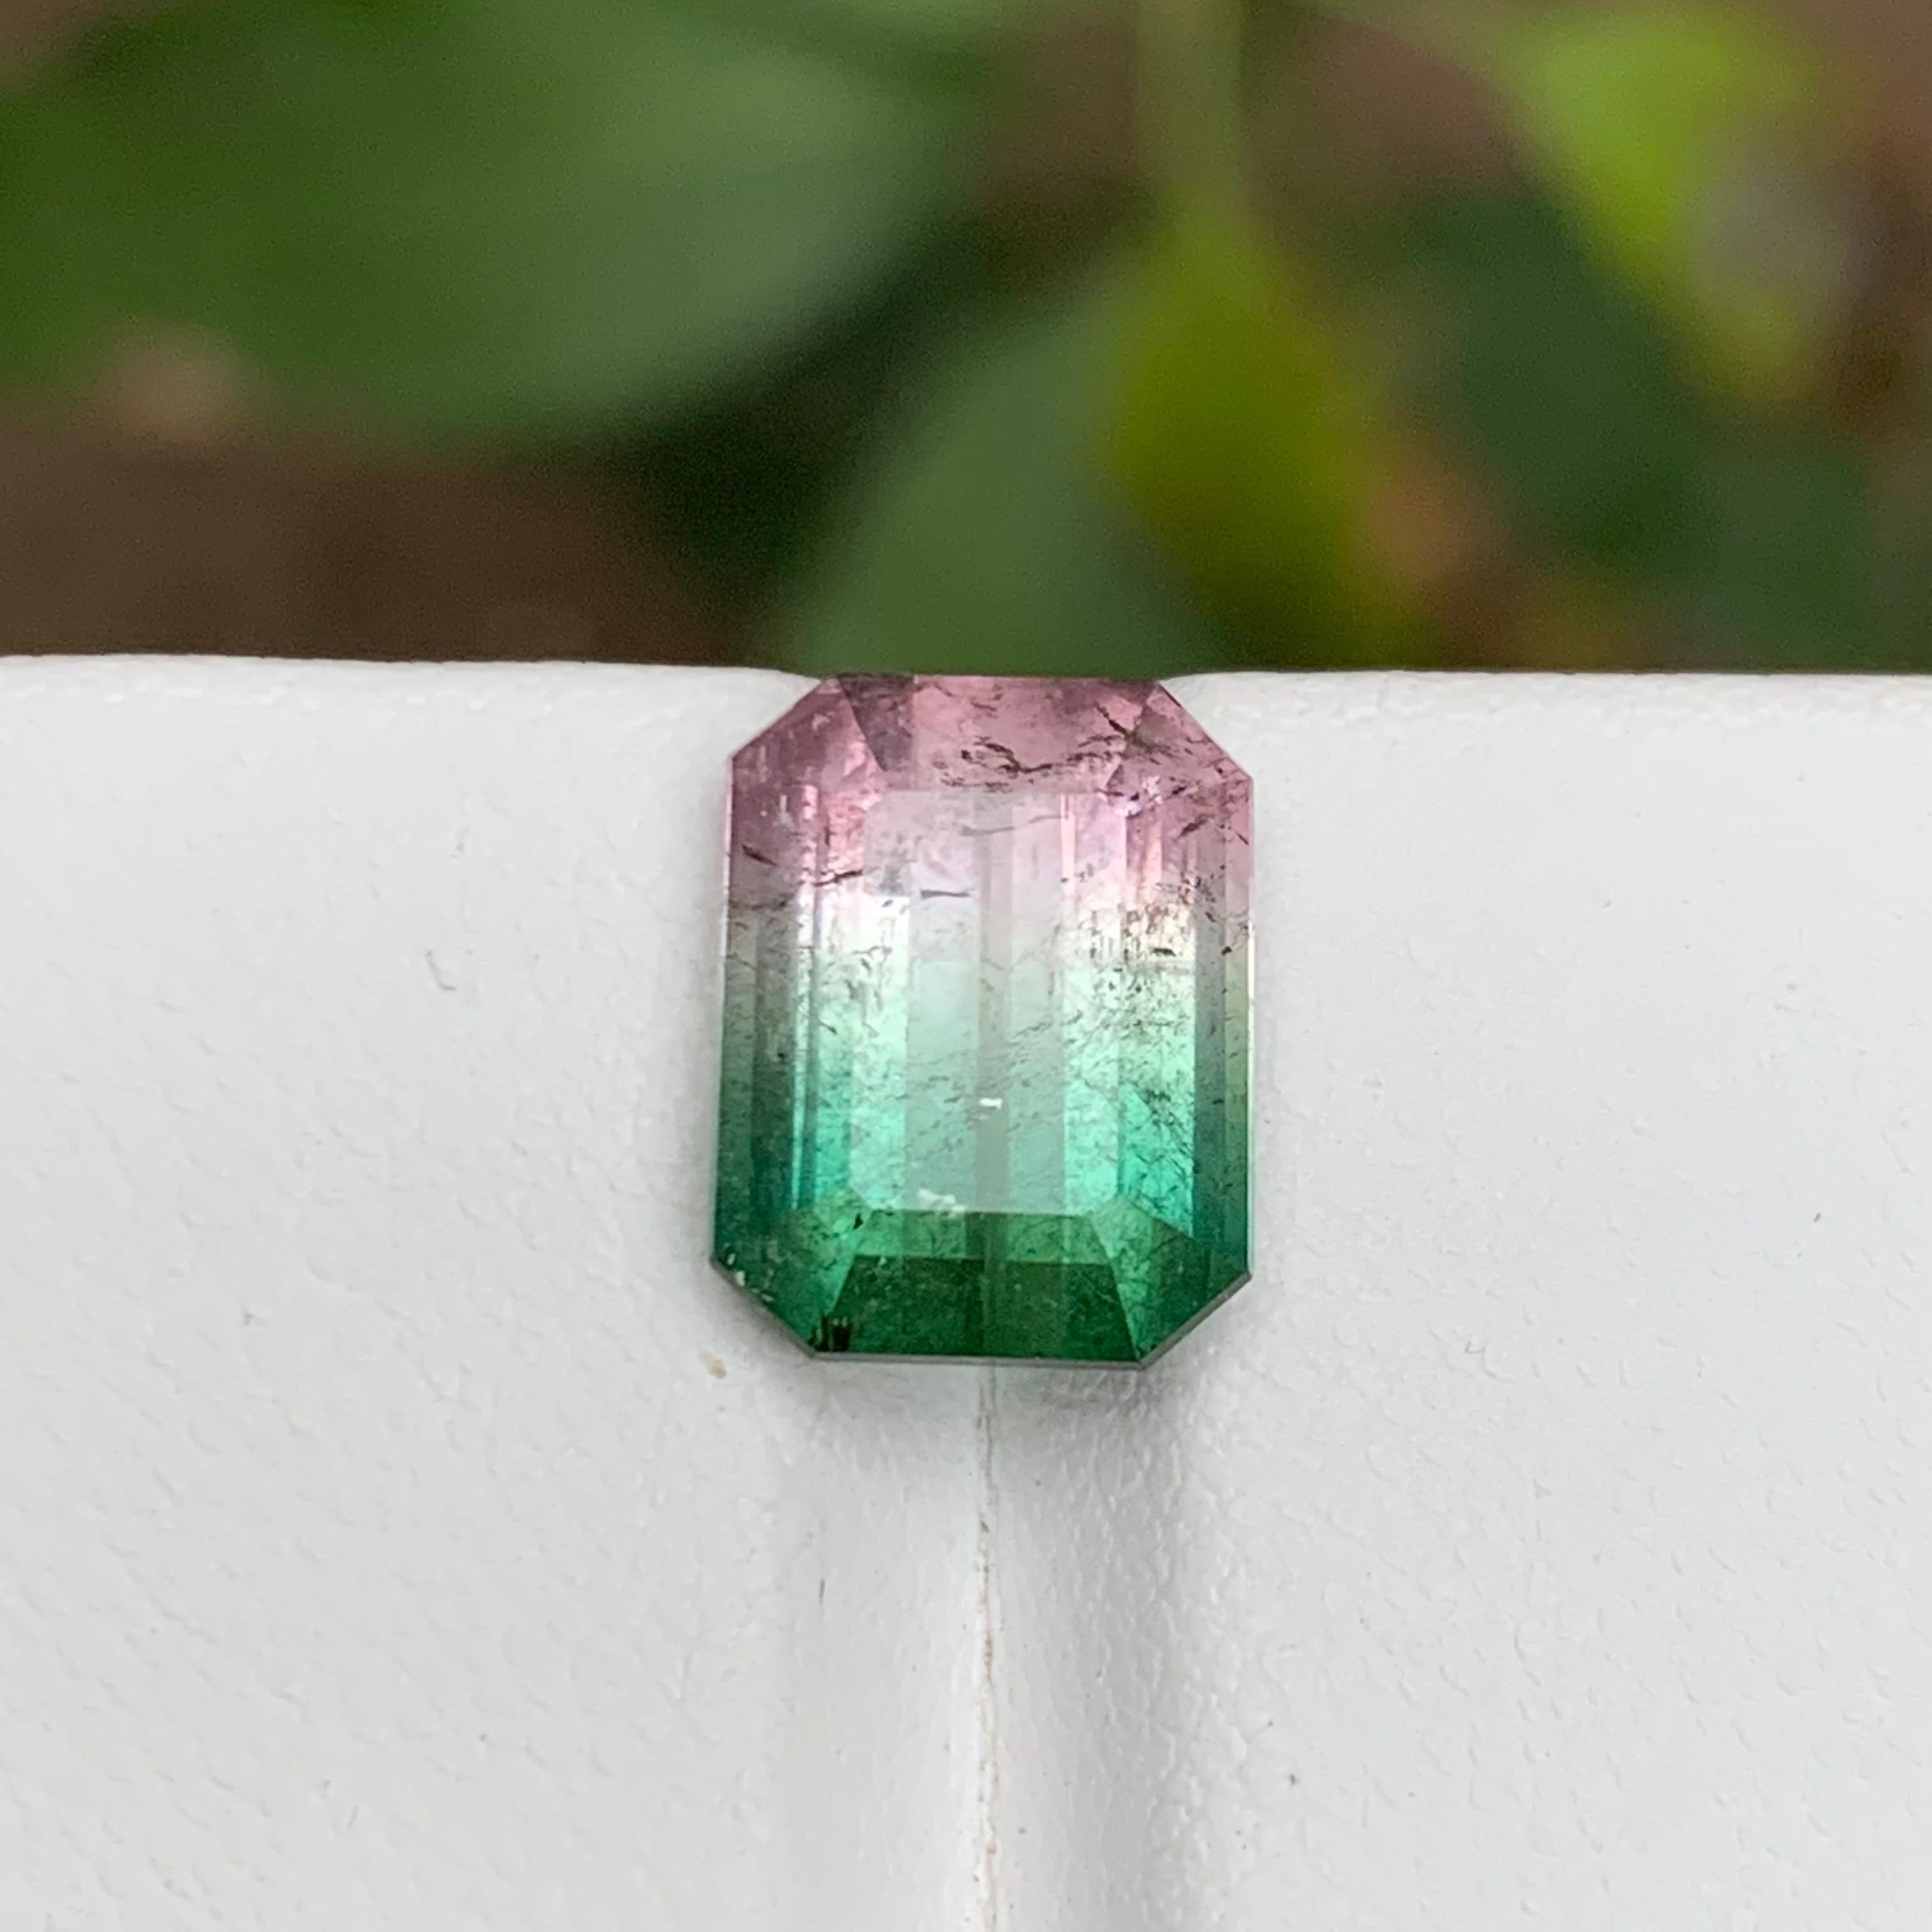 Rare Bicolor Watermelon Bluish Green & Pink Tourmaline Gemstone 5.90 Ct for Ring For Sale 5